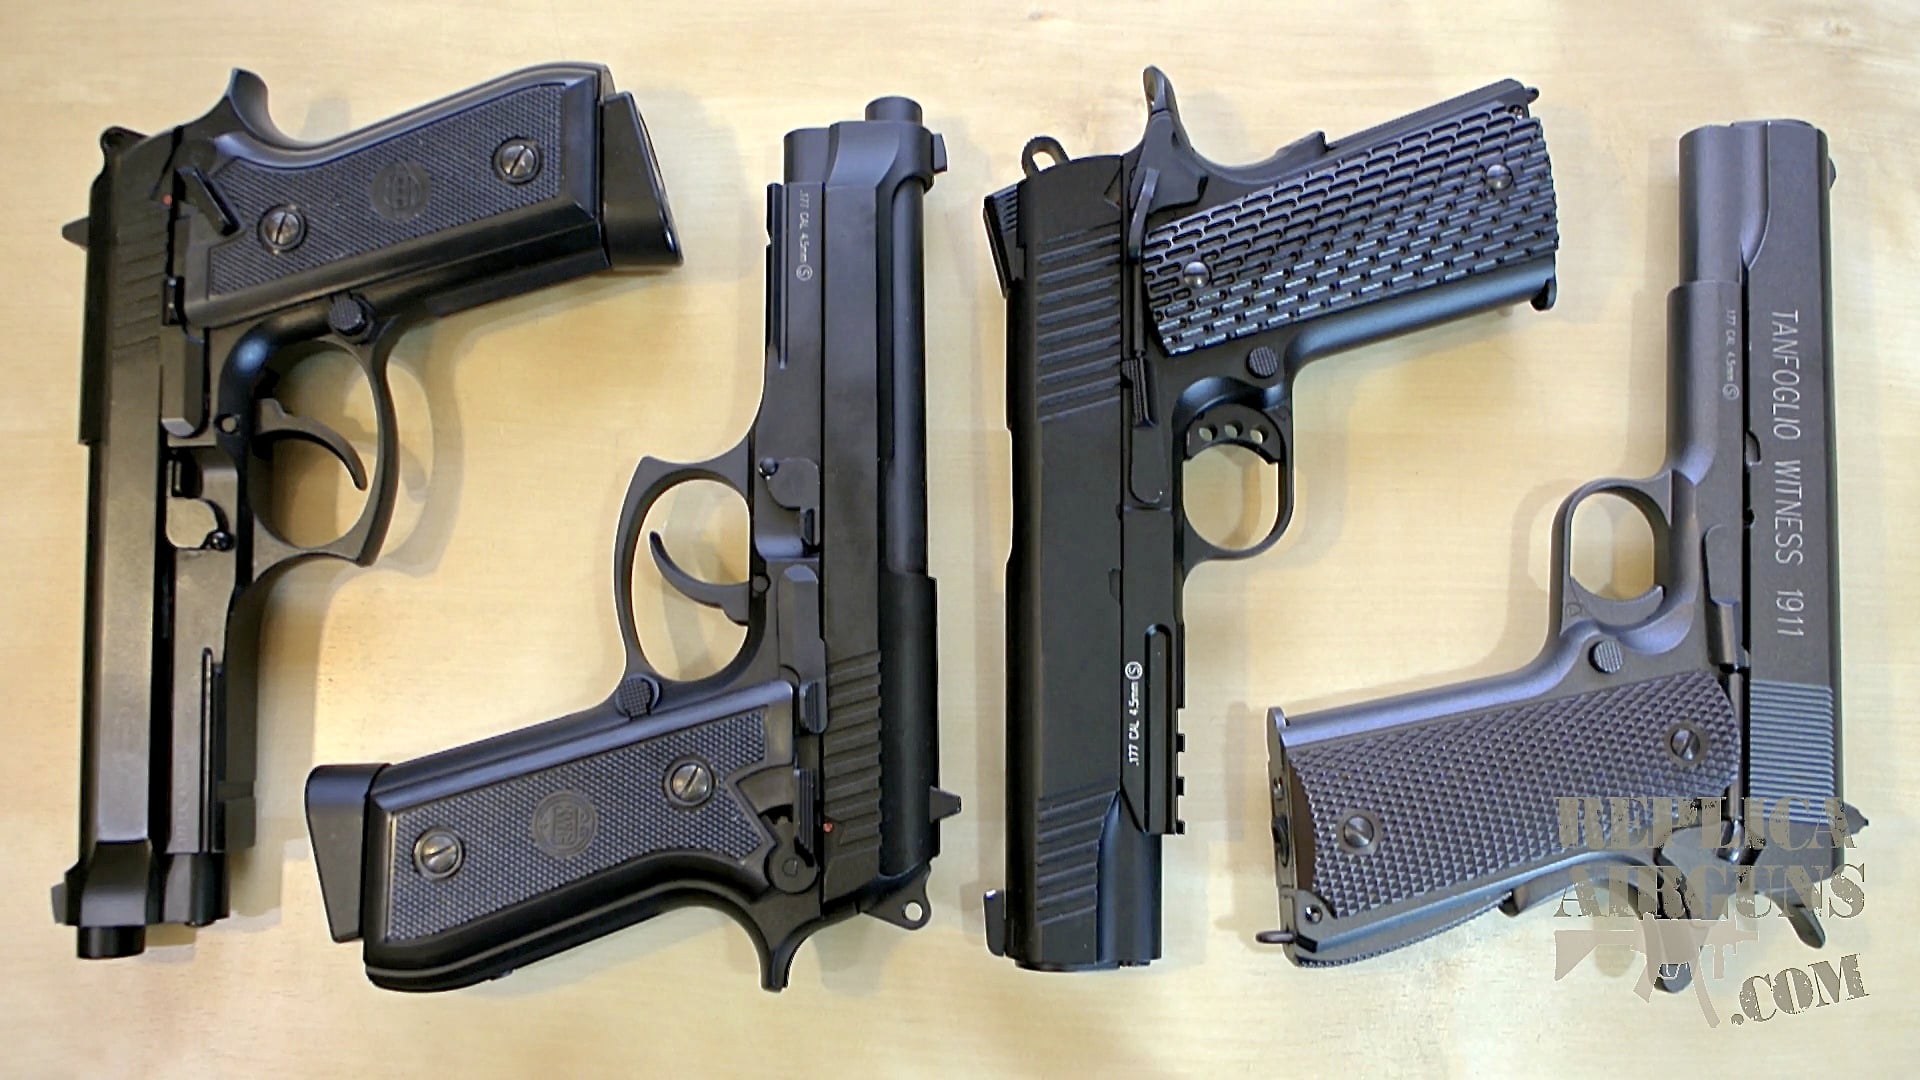 KWC Model M1911 A1 Tac - Model M92 BB and Airsoft Pistol Preview